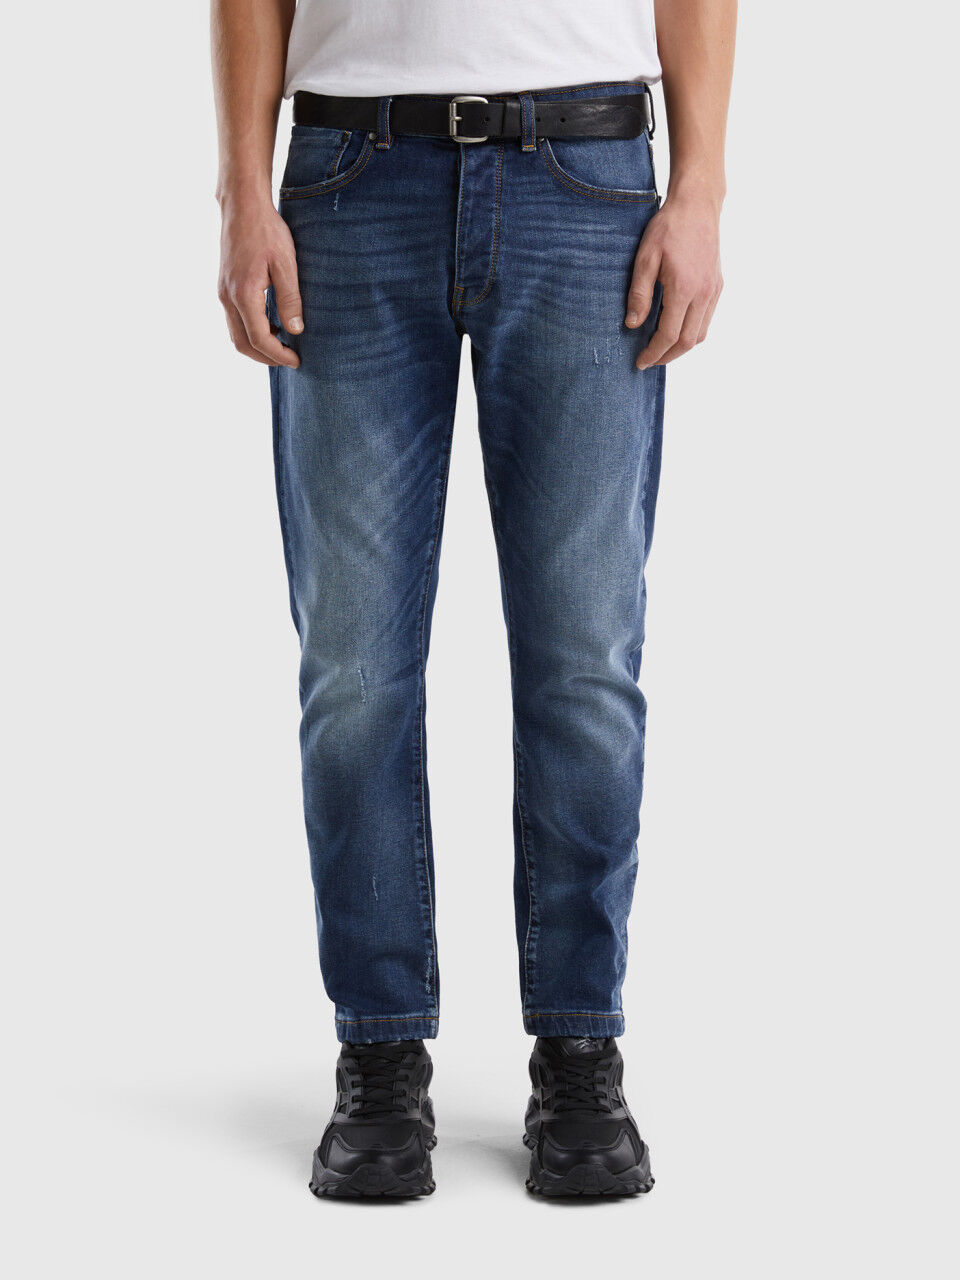 Men's Slim Fit Jeans New Collection 2023 | Benetton